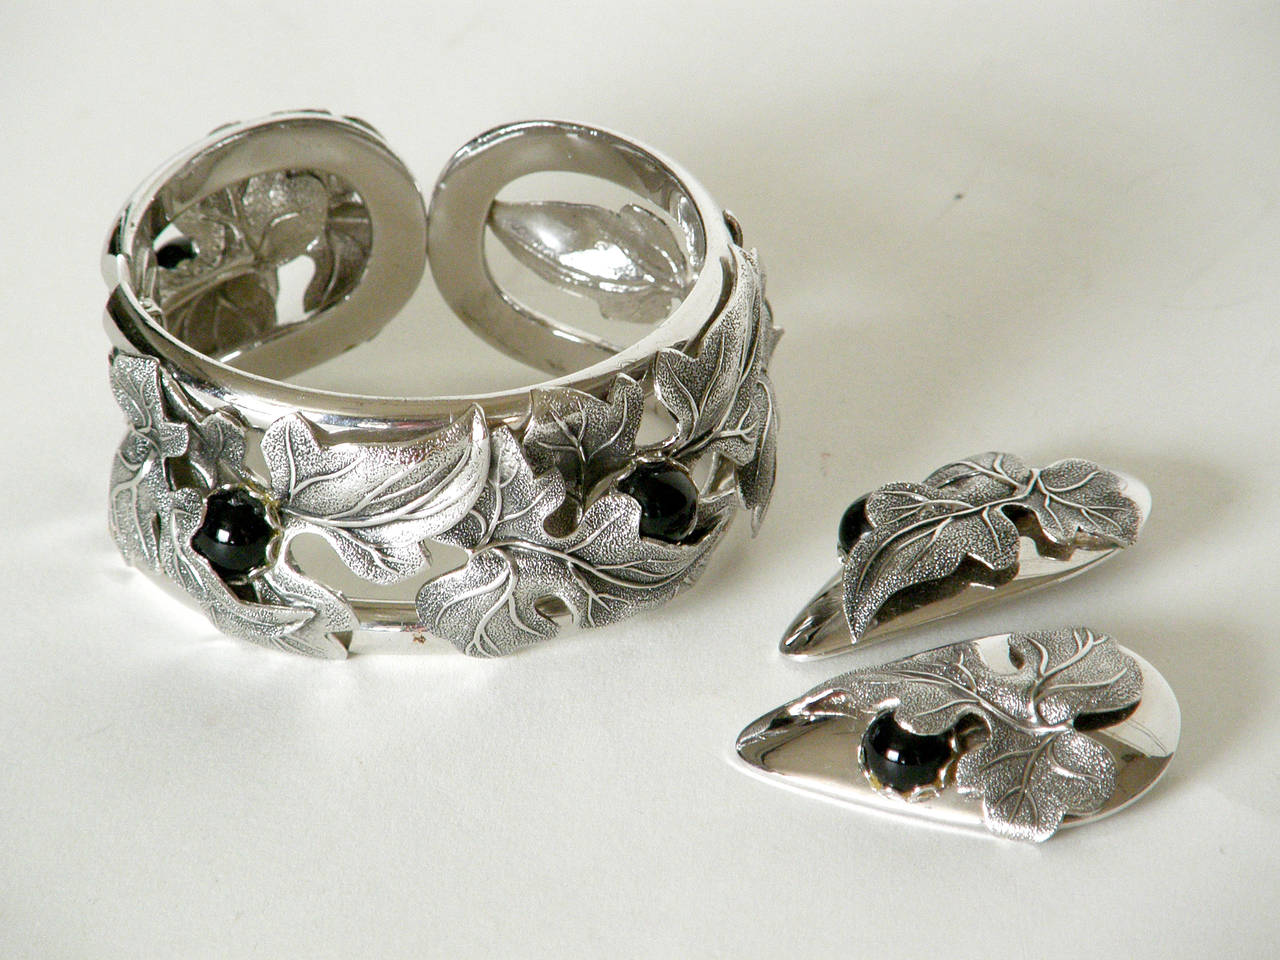 Whiting & Davis hinged cuff bracelet and earrings set with overlapping leaves and black cabochon stones.

approximate measurements:
bracelet- 1.25" w X 2.63" d x 2.38" h 
earrings- 1.13" w x 1.75" h x .5"